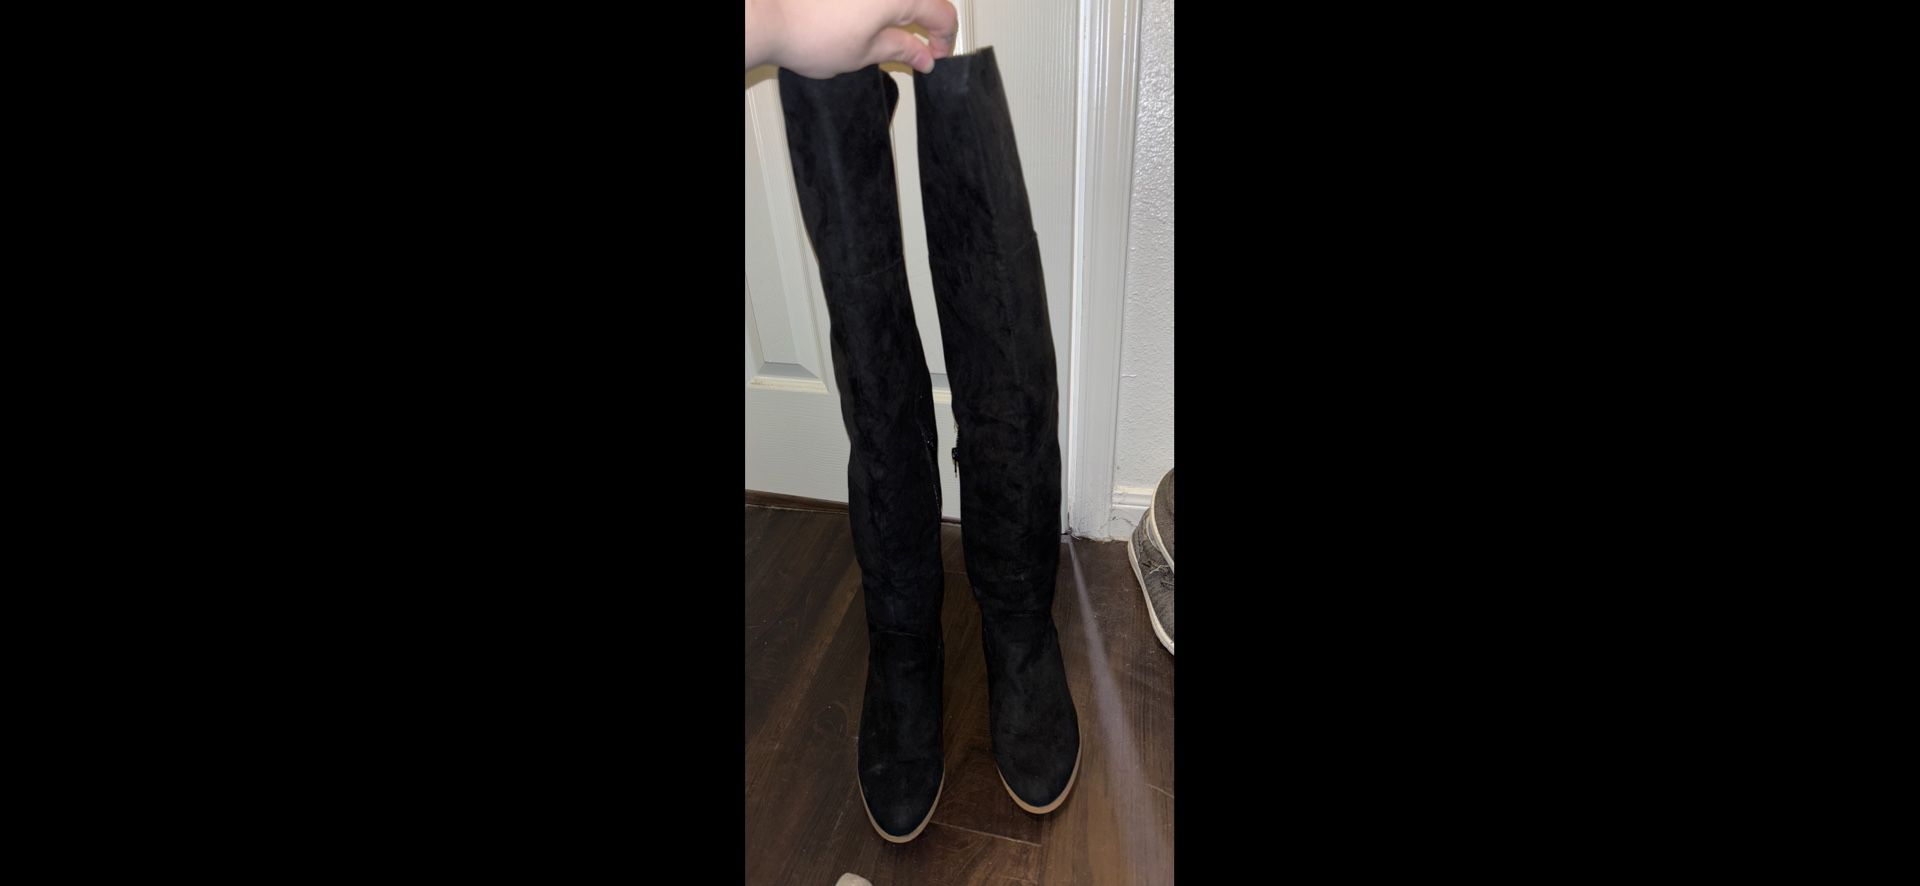 Thigh high boots size 10